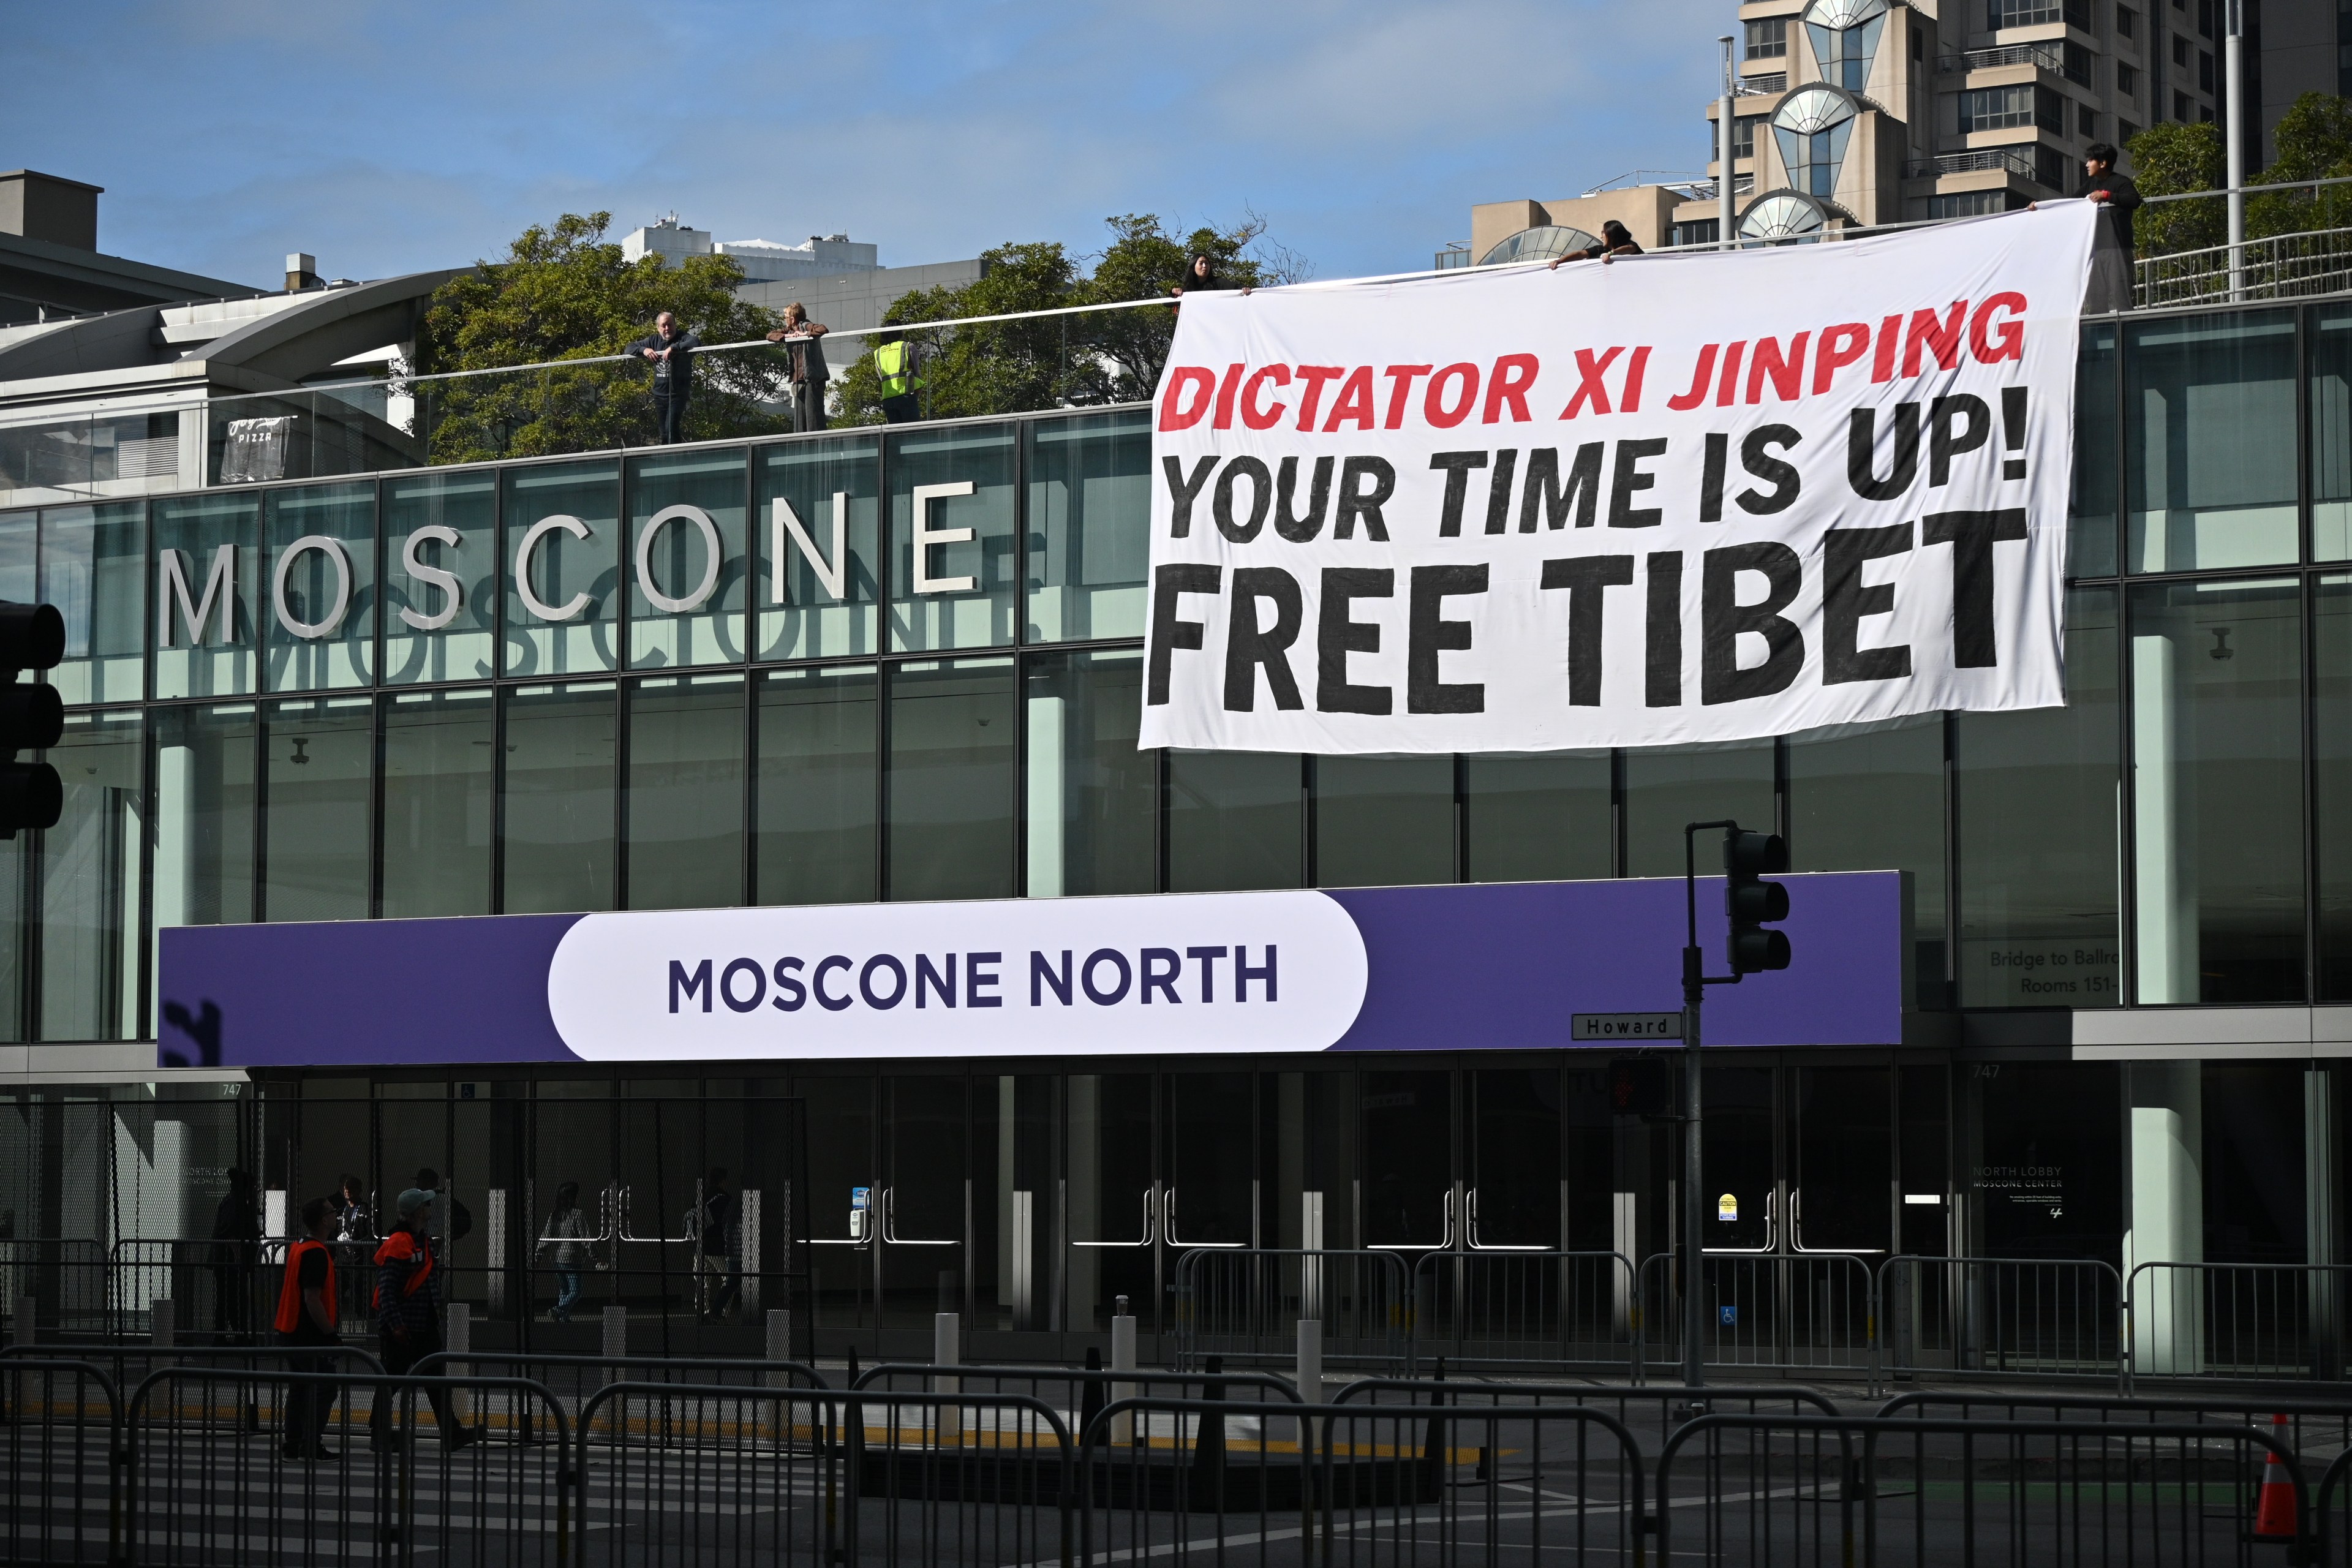 A sign reading "Dictator Xi Jinping Your Time Is Up! Free Tibet" hangs from Moscone Center.